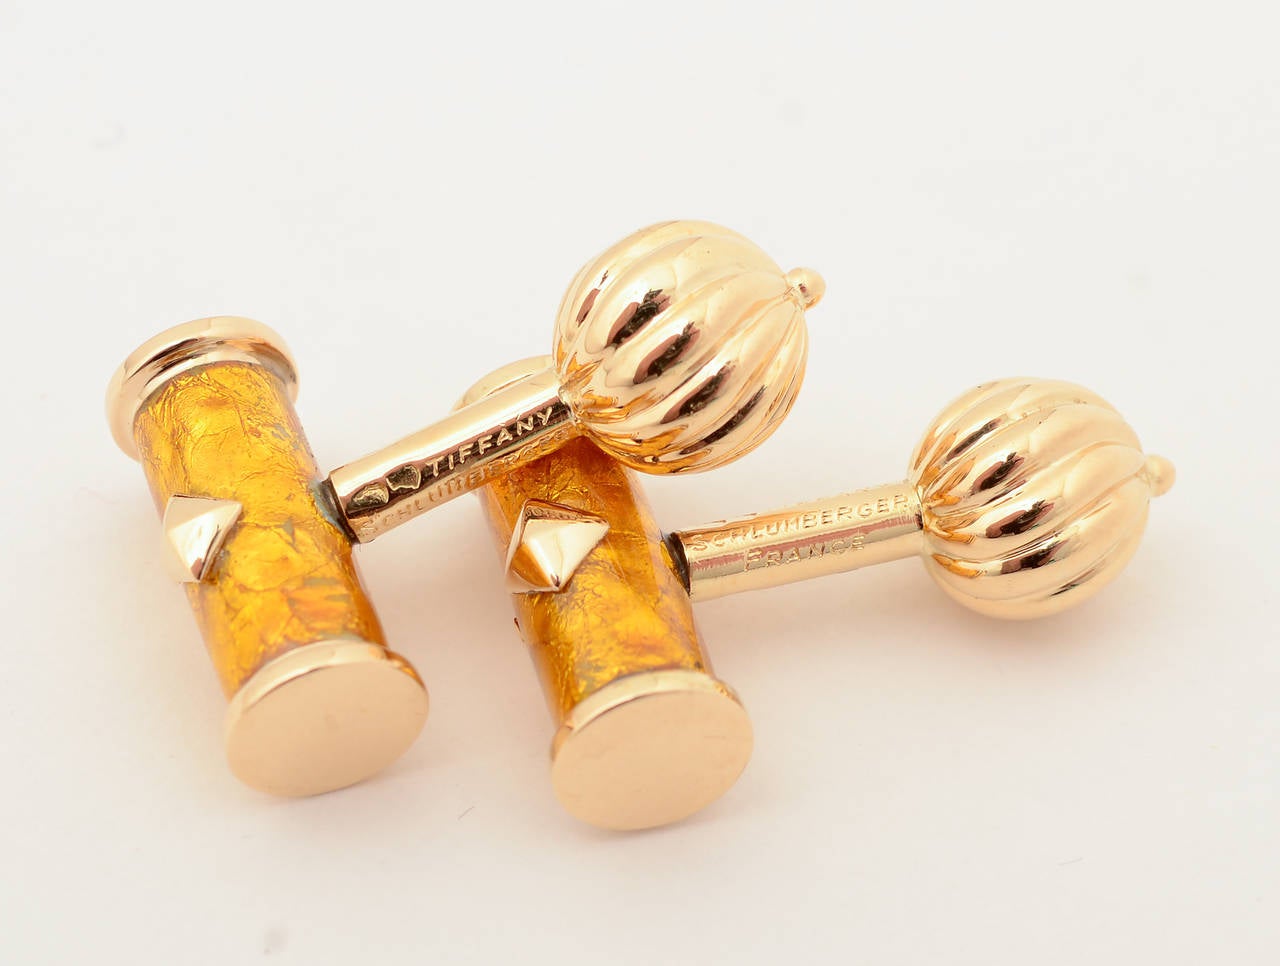 Elegant gold colored enamel cufflinks by Schlumberger. The barrel shaped front is backed with a swirling, striated ball. The barrel measures 11/16